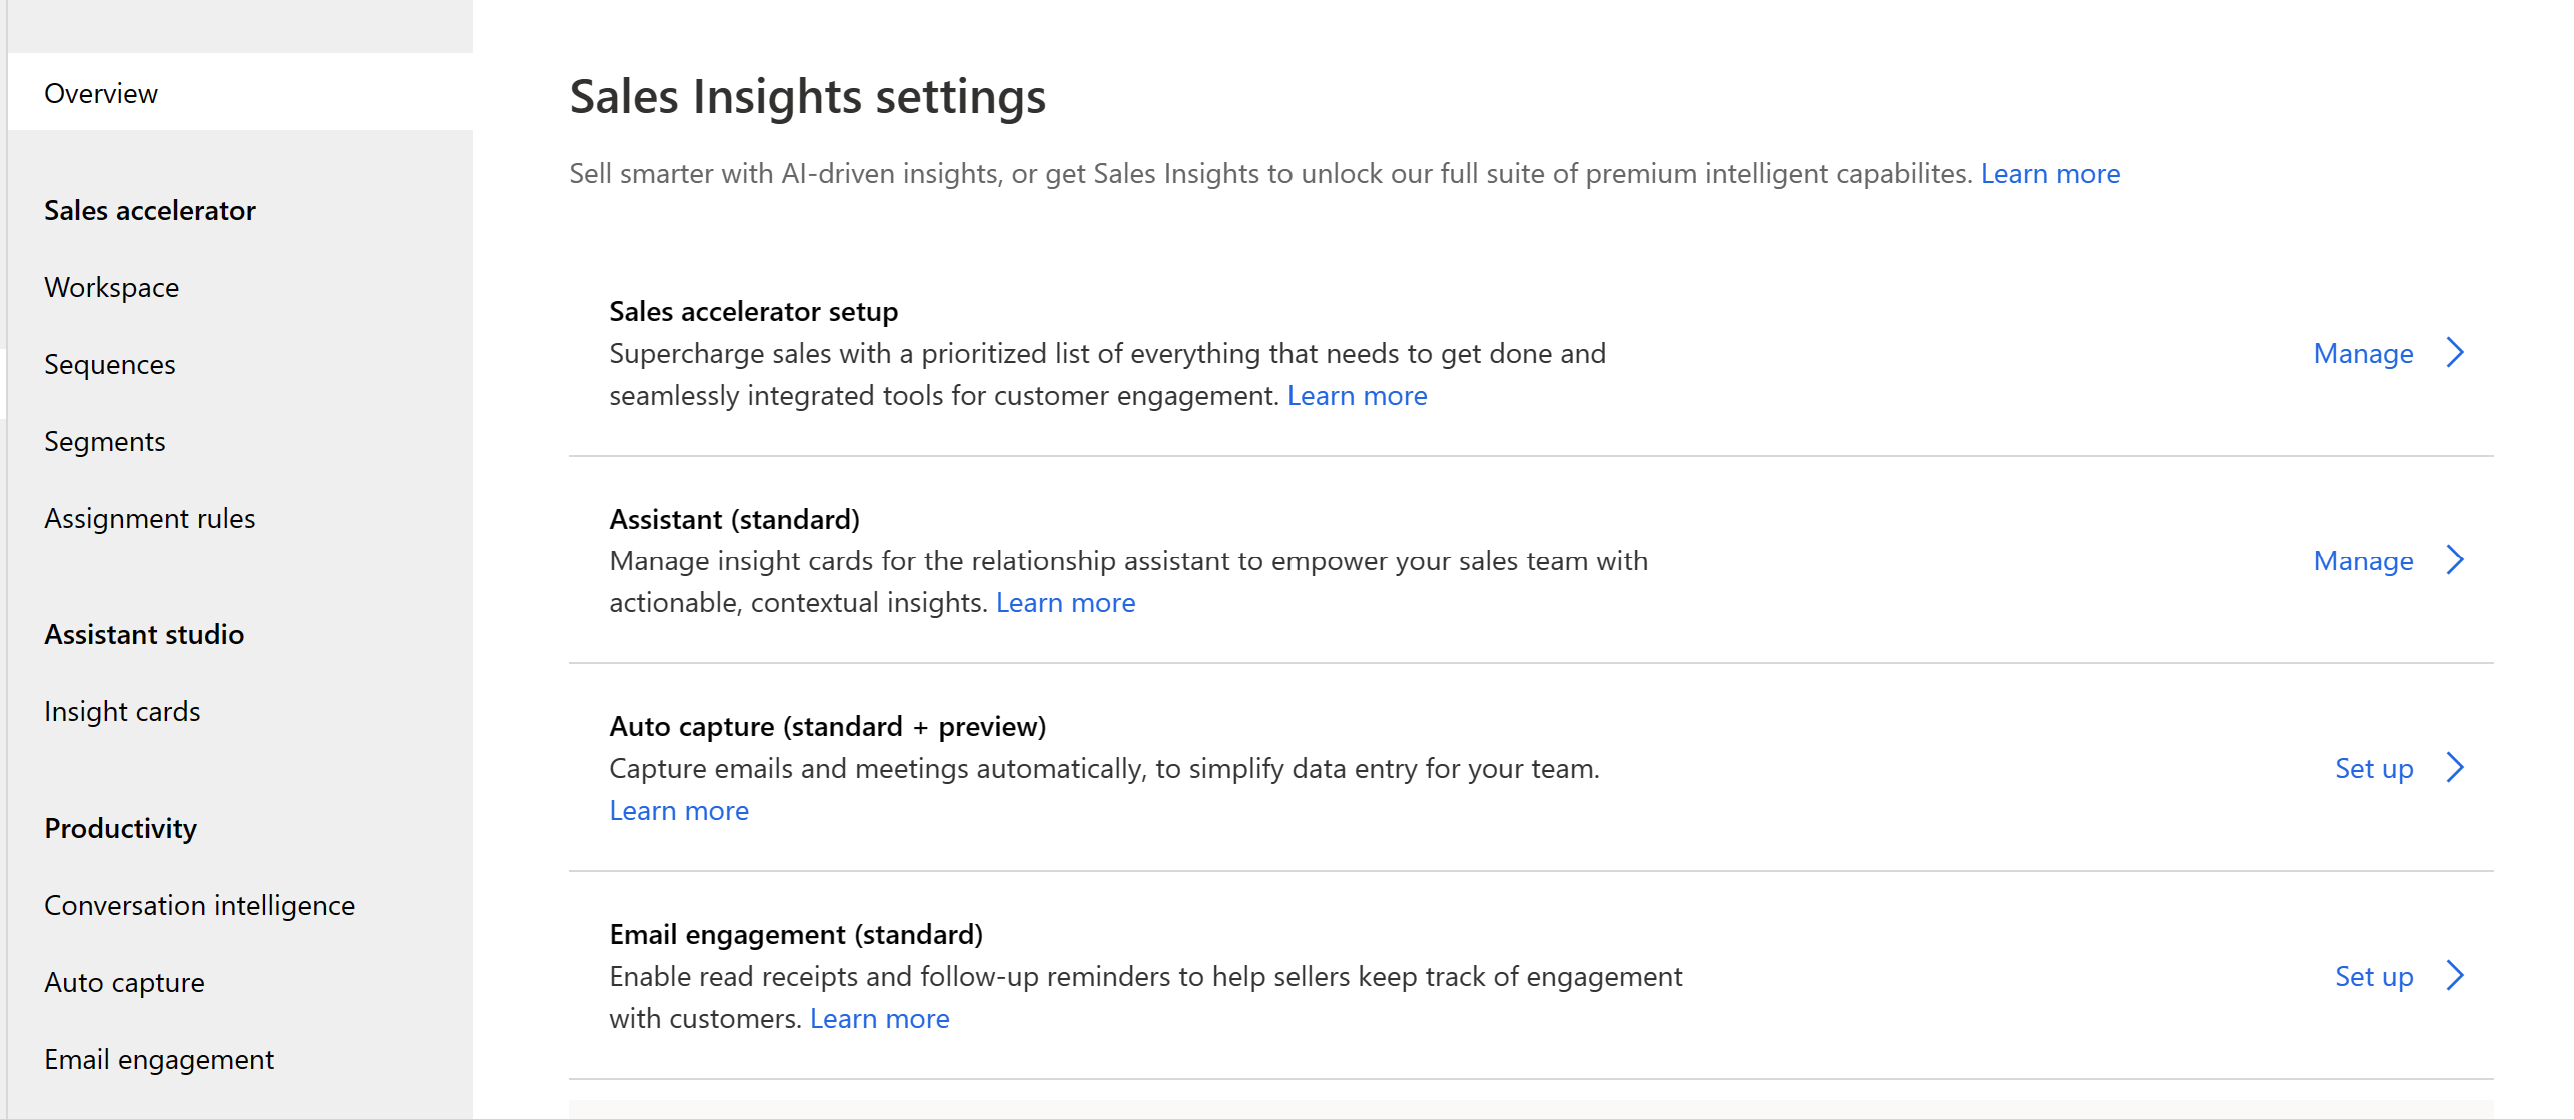 Sales insights settings page.